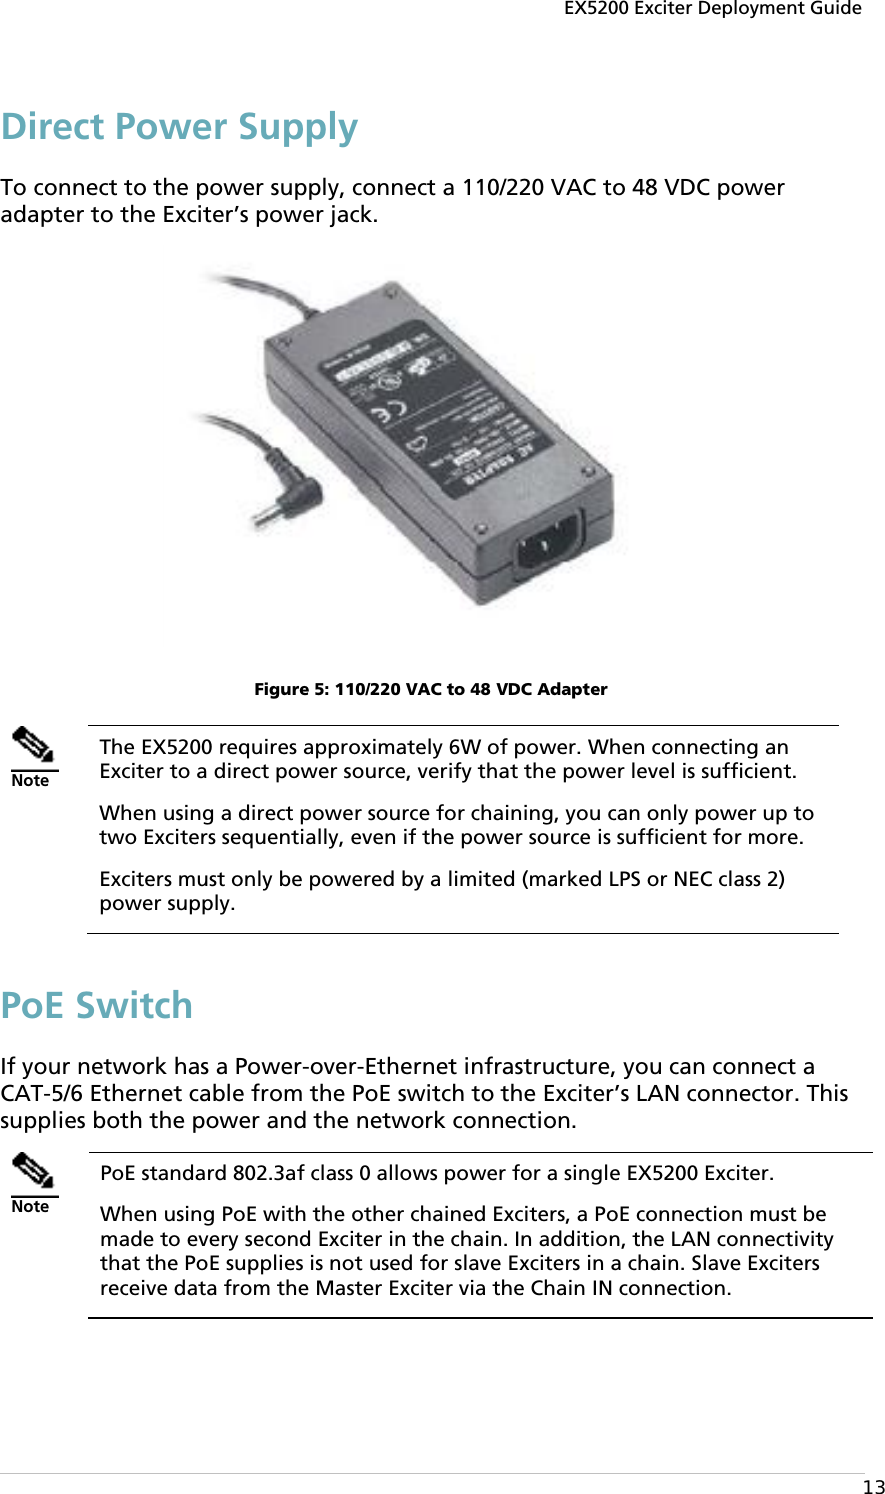 EX5200 Exciter Deployment Guide  13 Direct Power Supply To connect to the power supply, connect a 110/220 VAC to 48 VDC power adapter to the Exciter’s power jack.  Figure 5: 110/220 VAC to 48 VDC Adapter  Note The EX5200 requires approximately 6W of power. When connecting an Exciter to a direct power source, verify that the power level is sufficient.  When using a direct power source for chaining, you can only power up to two Exciters sequentially, even if the power source is sufficient for more.  Exciters must only be powered by a limited (marked LPS or NEC class 2) power supply. PoE Switch If your network has a Power-over-Ethernet infrastructure, you can connect a CAT-5/6 Ethernet cable from the PoE switch to the Exciter’s LAN connector. This supplies both the power and the network connection.   Note PoE standard 802.3af class 0 allows power for a single EX5200 Exciter. When using PoE with the other chained Exciters, a PoE connection must be made to every second Exciter in the chain. In addition, the LAN connectivity that the PoE supplies is not used for slave Exciters in a chain. Slave Exciters receive data from the Master Exciter via the Chain IN connection. 